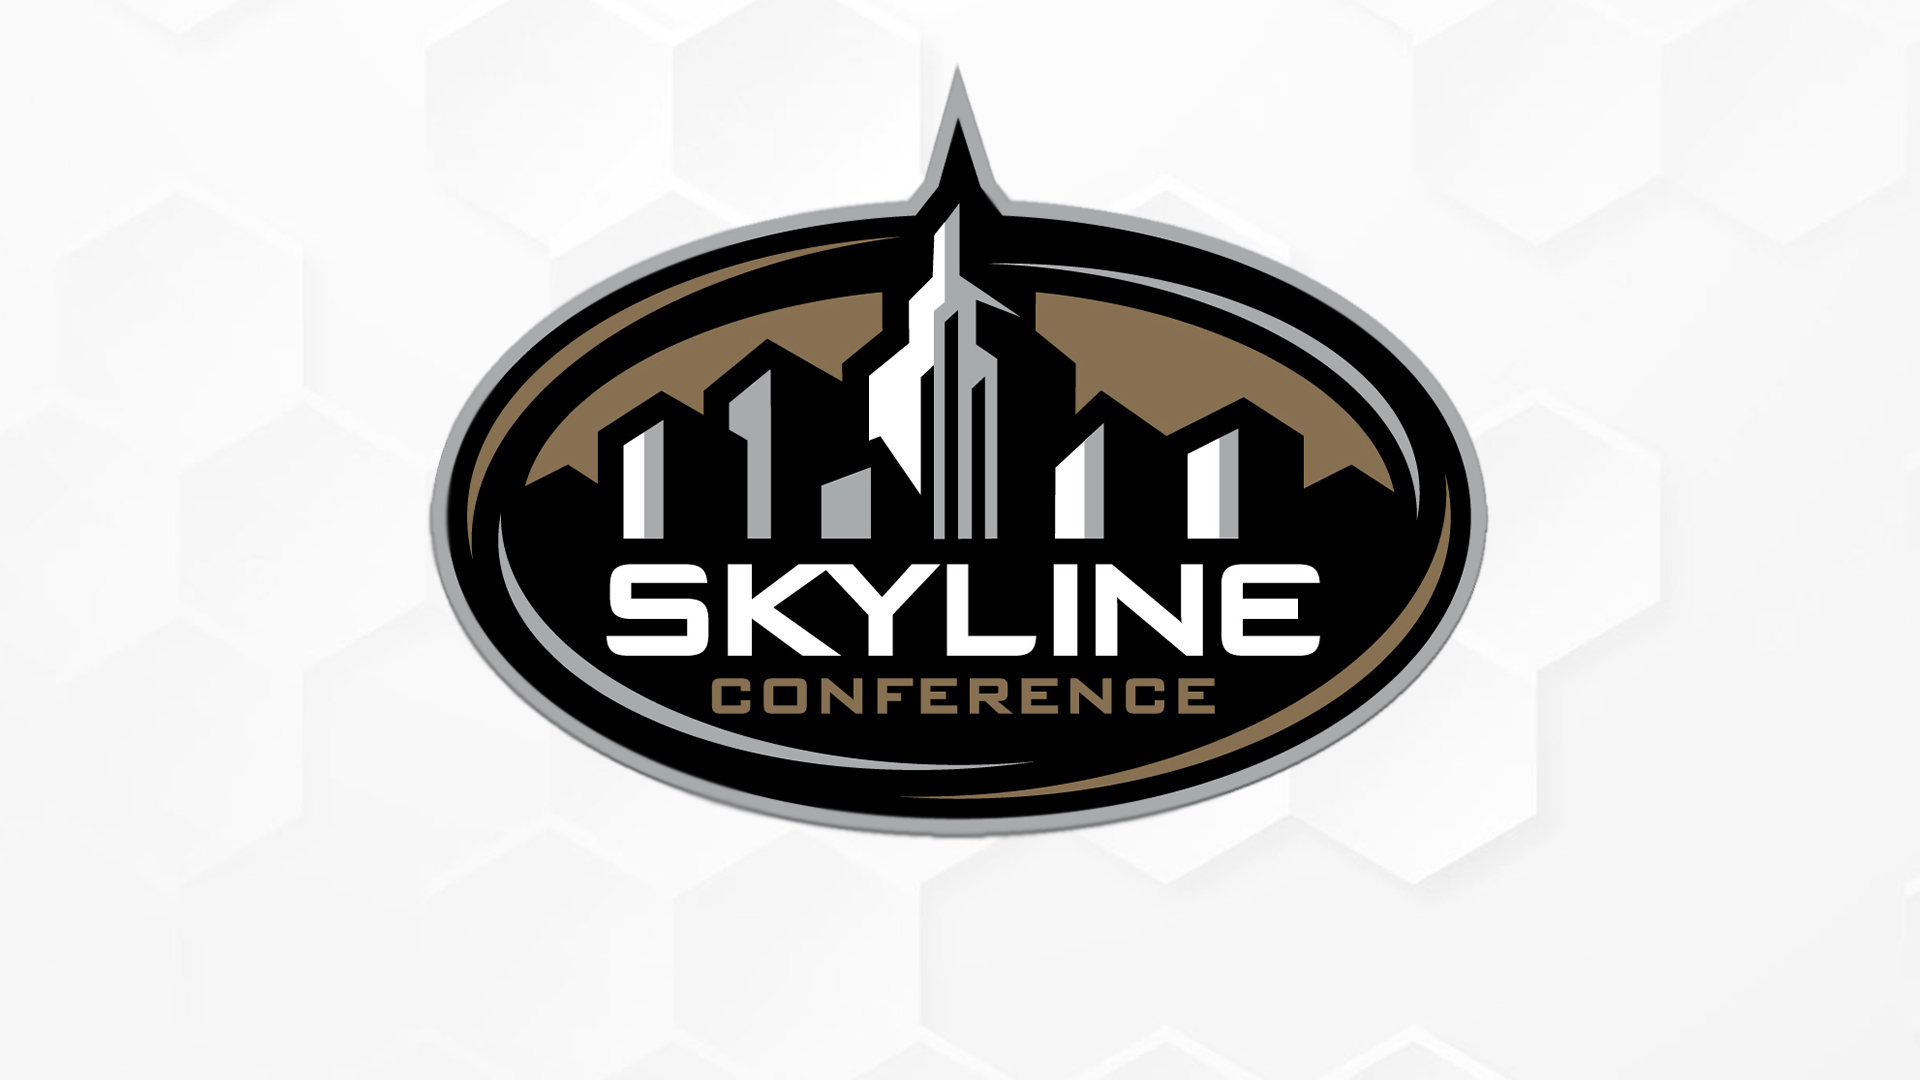 79 Golden Eagles named to Skyline Conference Fall Honor Roll